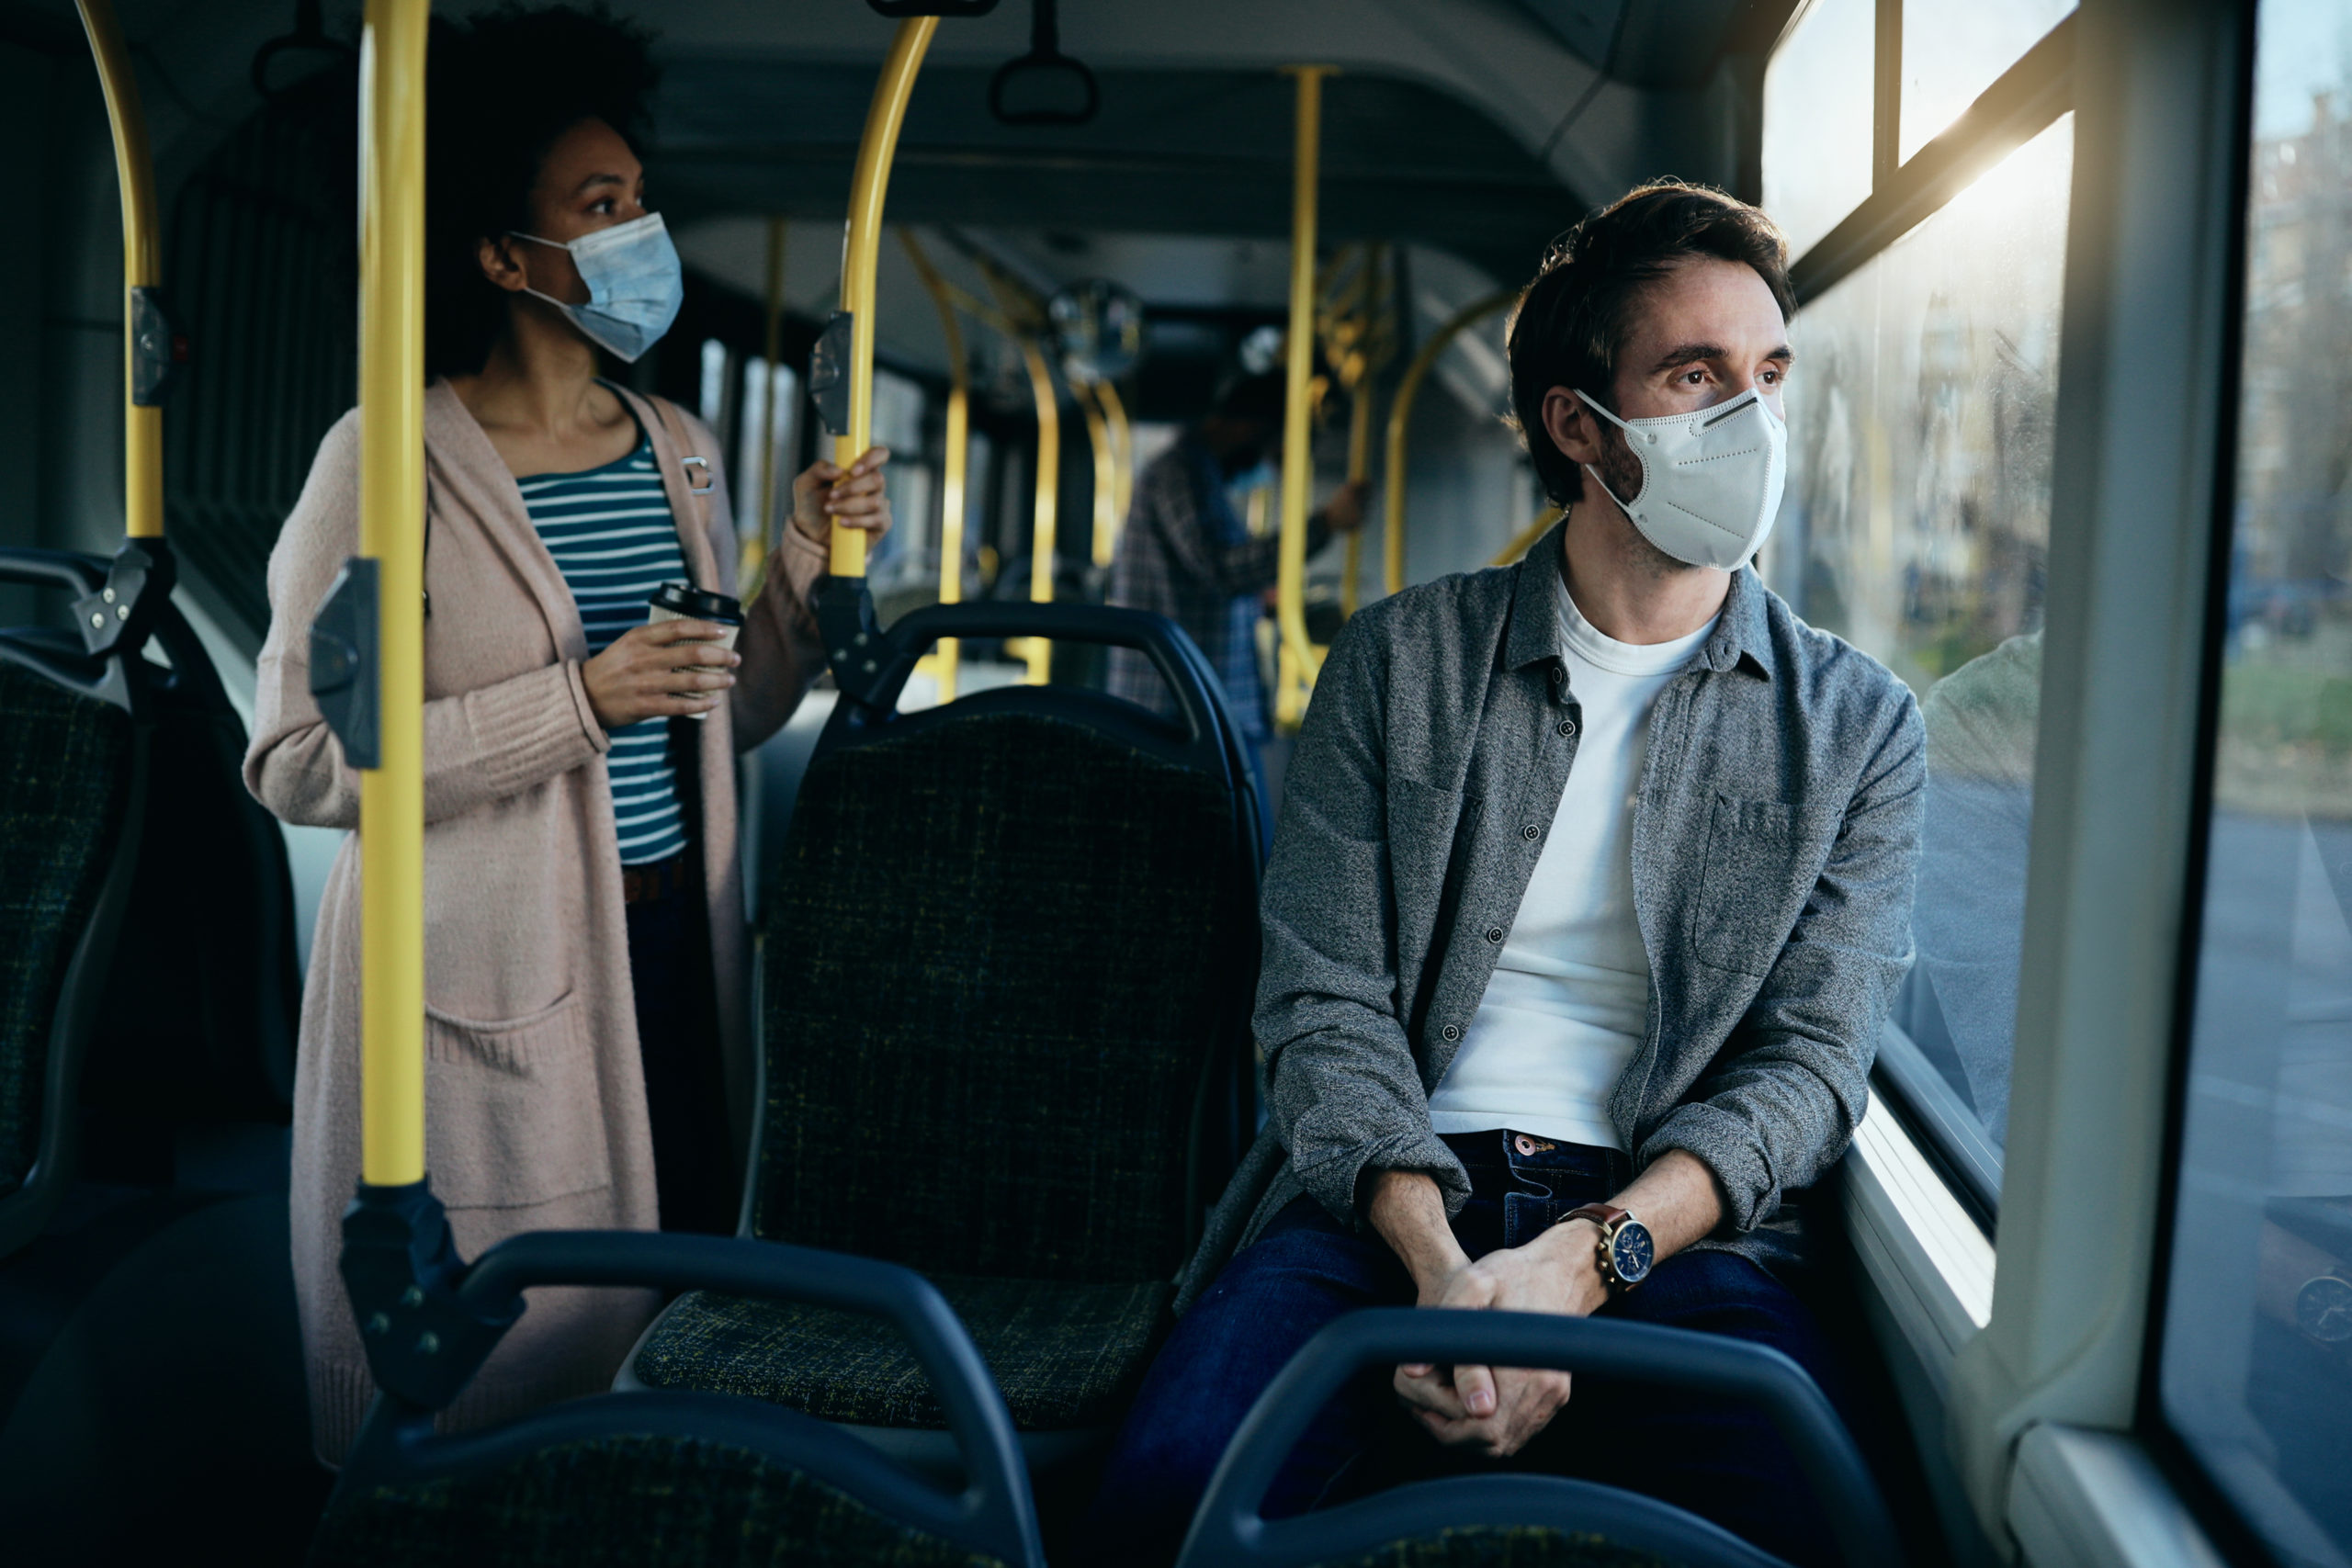 Man with protective face mask thinking of something while traveling by public transport and looking through the window.